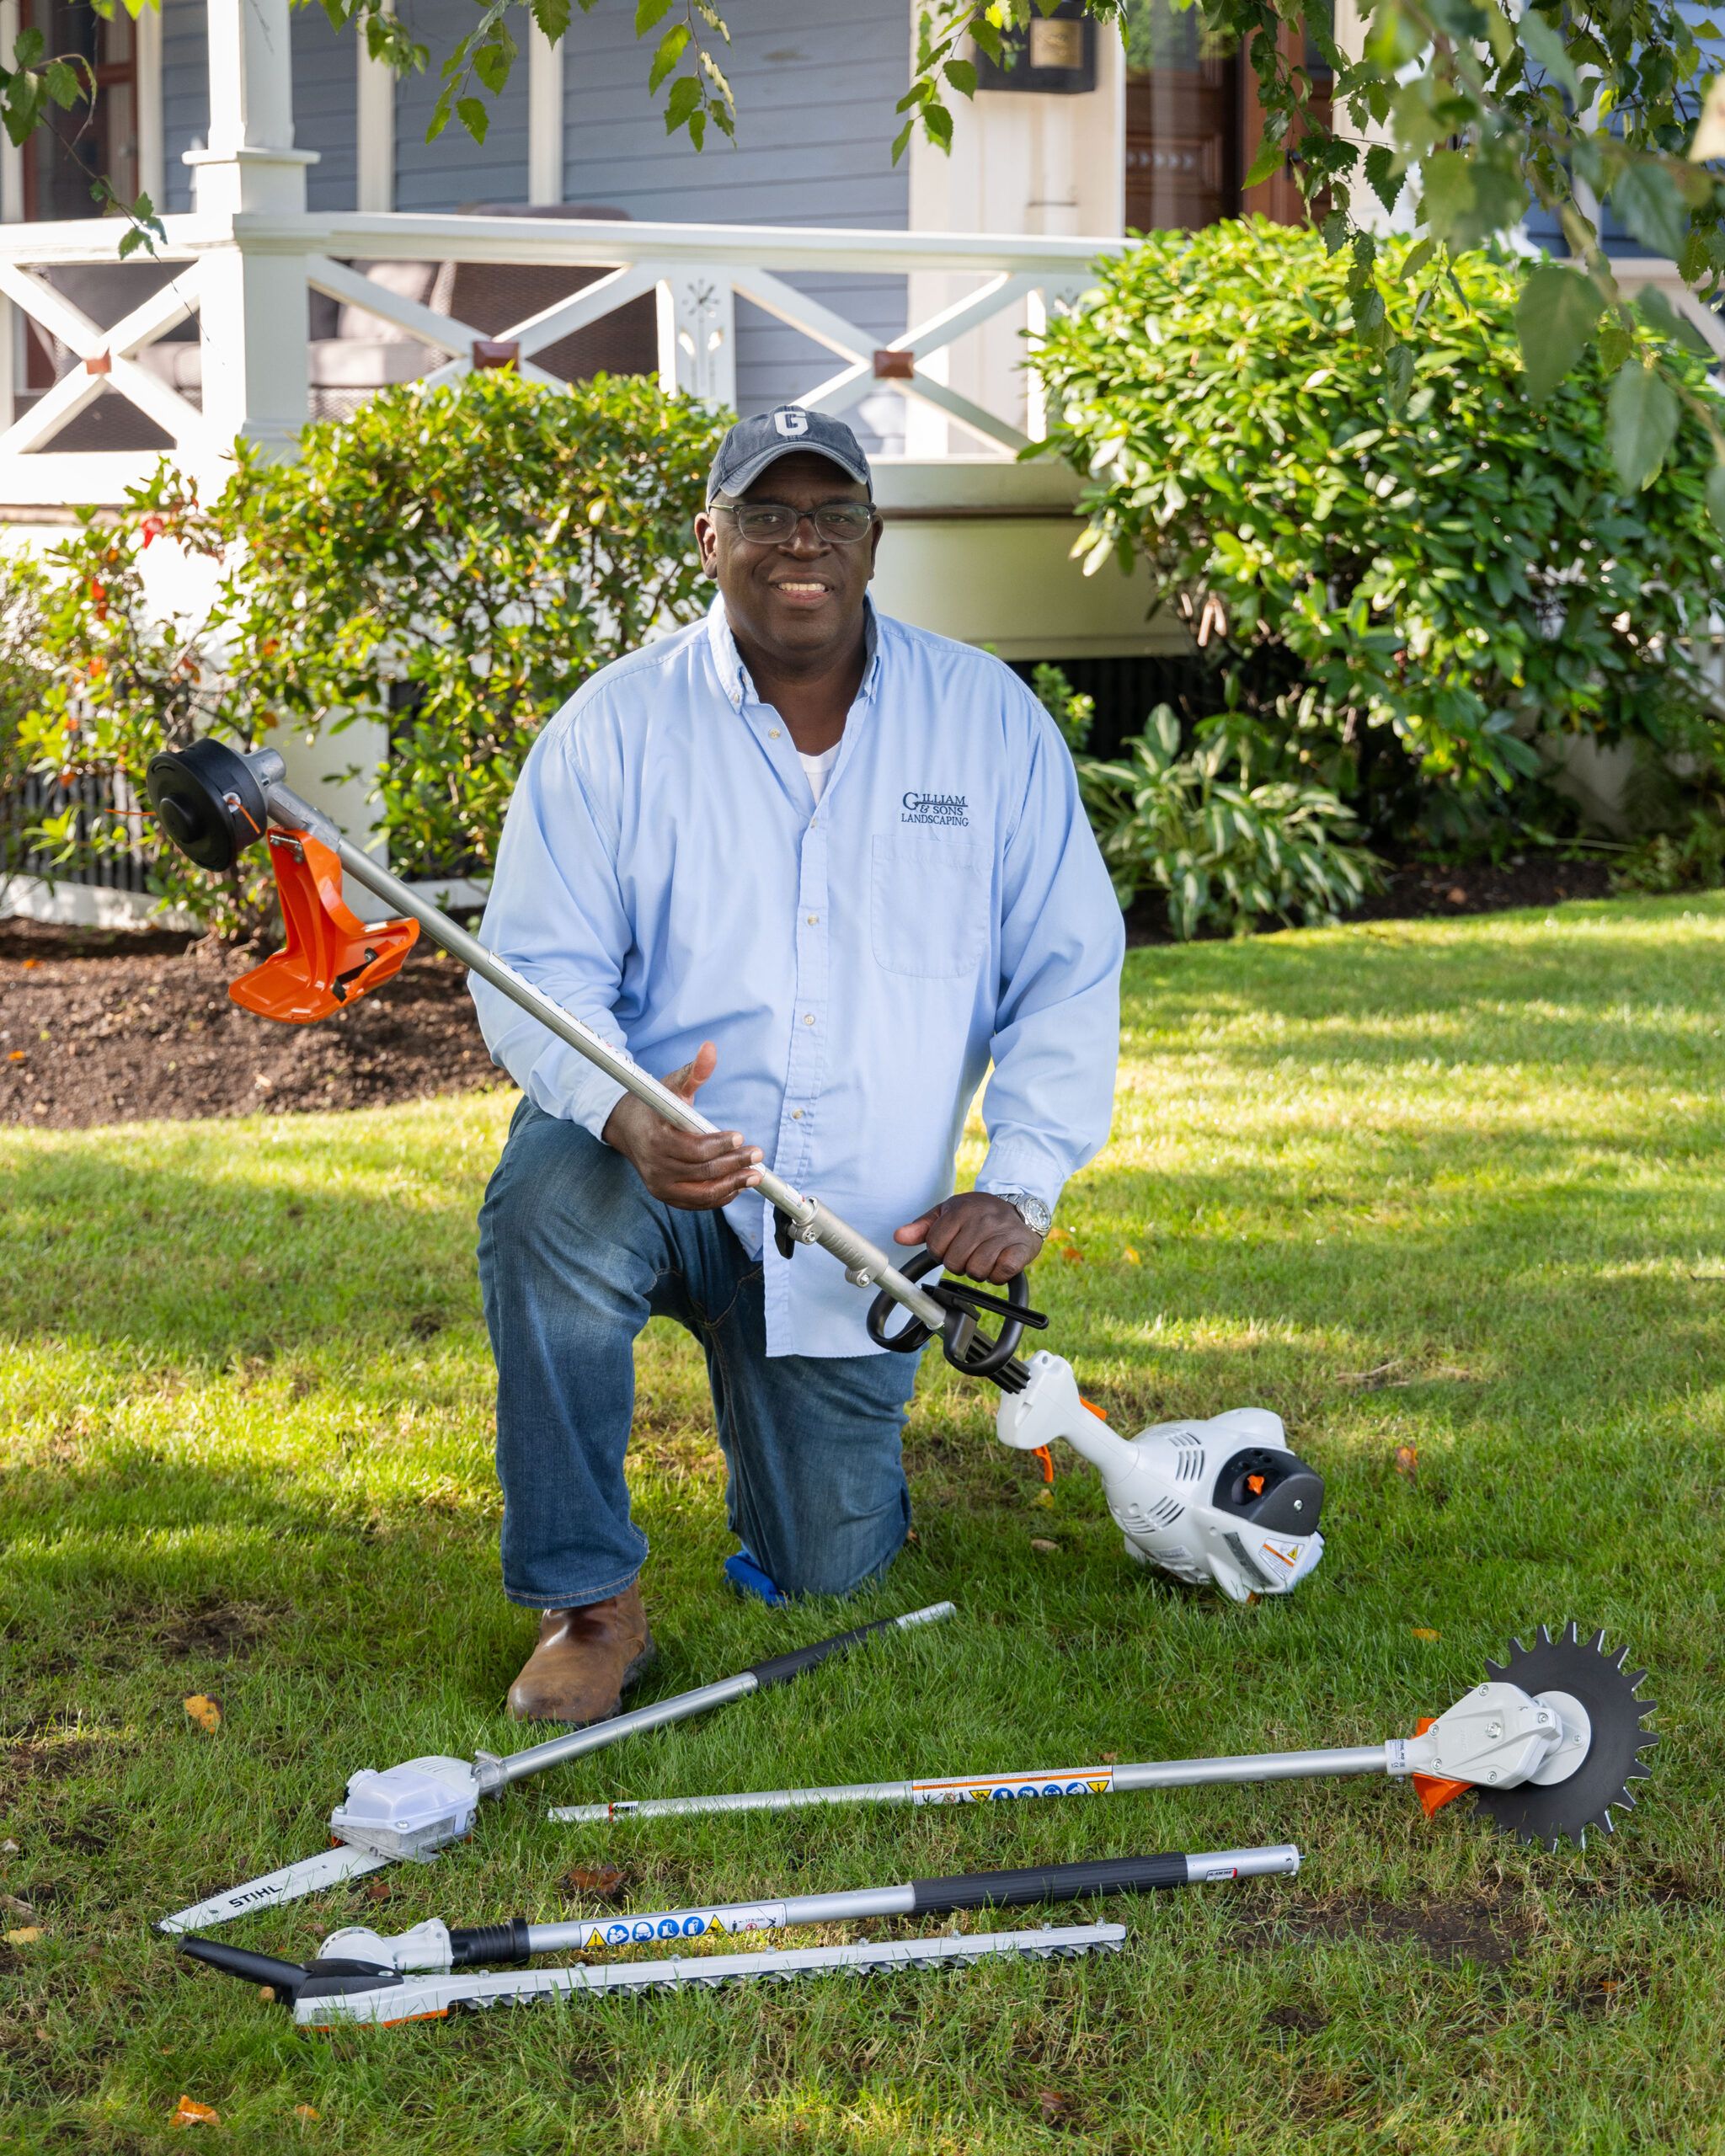 Lee Gilliam holding a multi head trimmer with additional attachments on the ground.